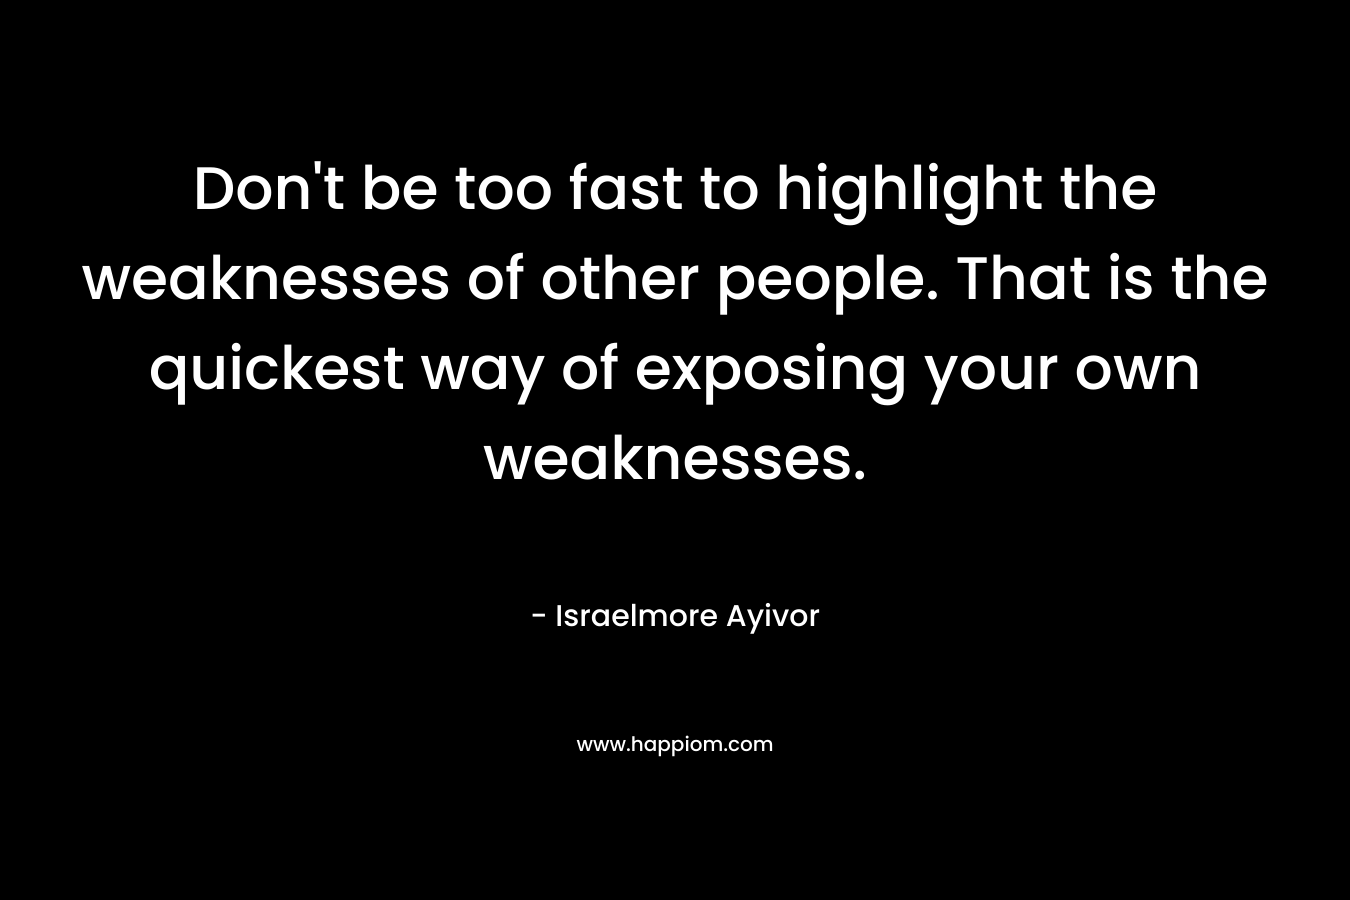 Don't be too fast to highlight the weaknesses of other people. That is the quickest way of exposing your own weaknesses.